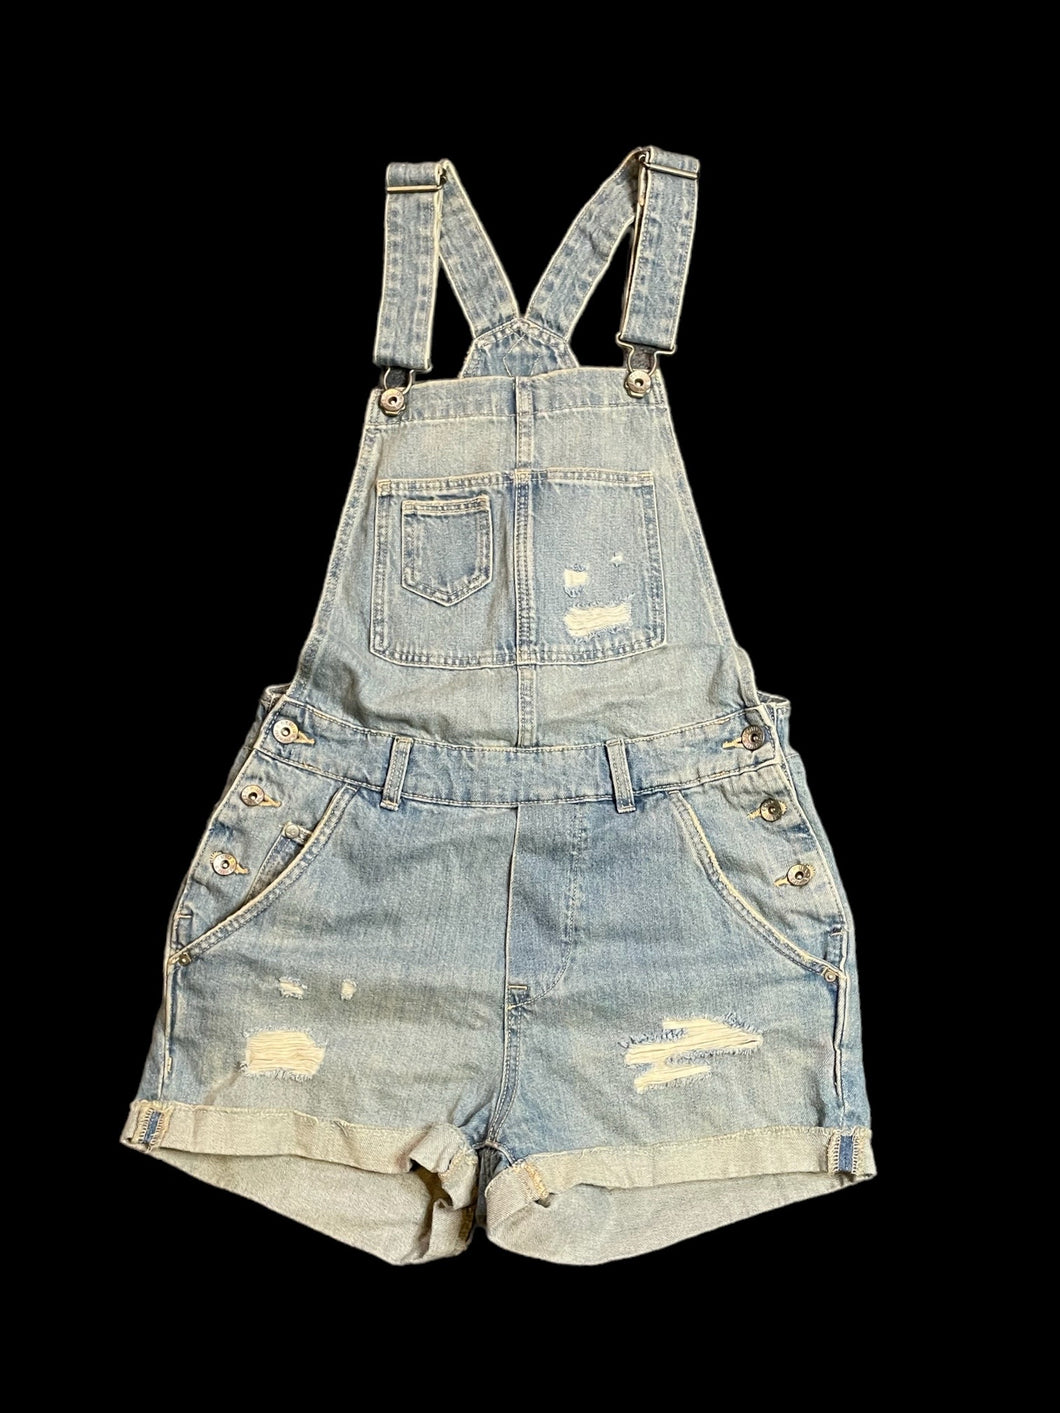 S Light blue distressed denim overall shorts w/ adjustable straps, pockets, belt loops, cuffed hems, & side button closures